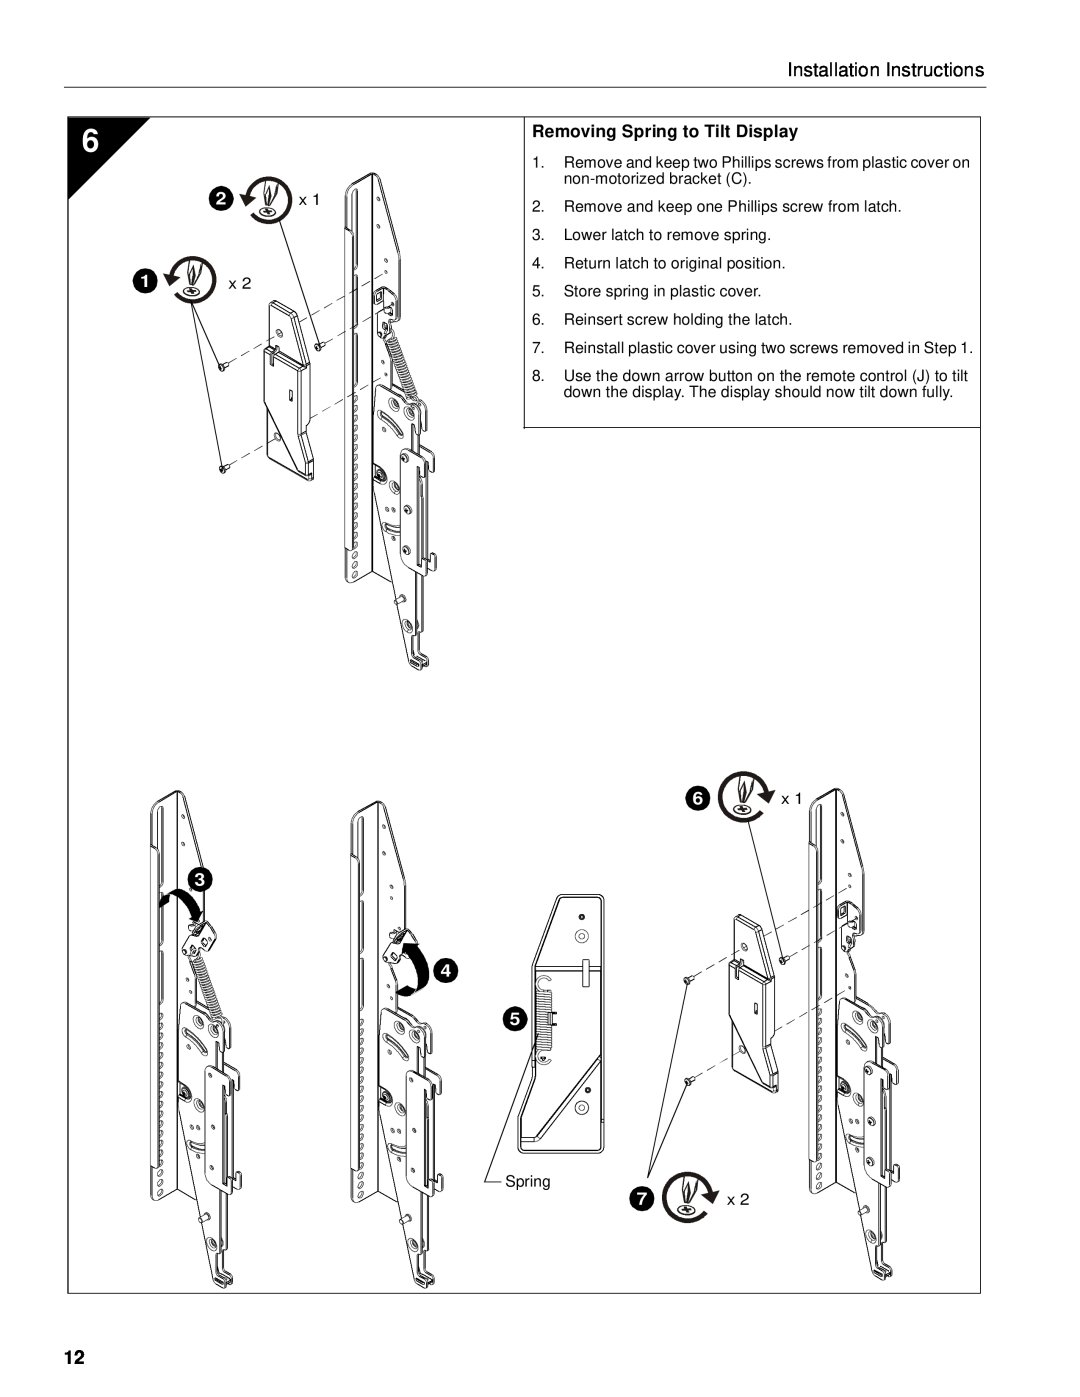 Chief Manufacturing CM8 installation instructions Removing Spring to Tilt Display, Installation Instructions 